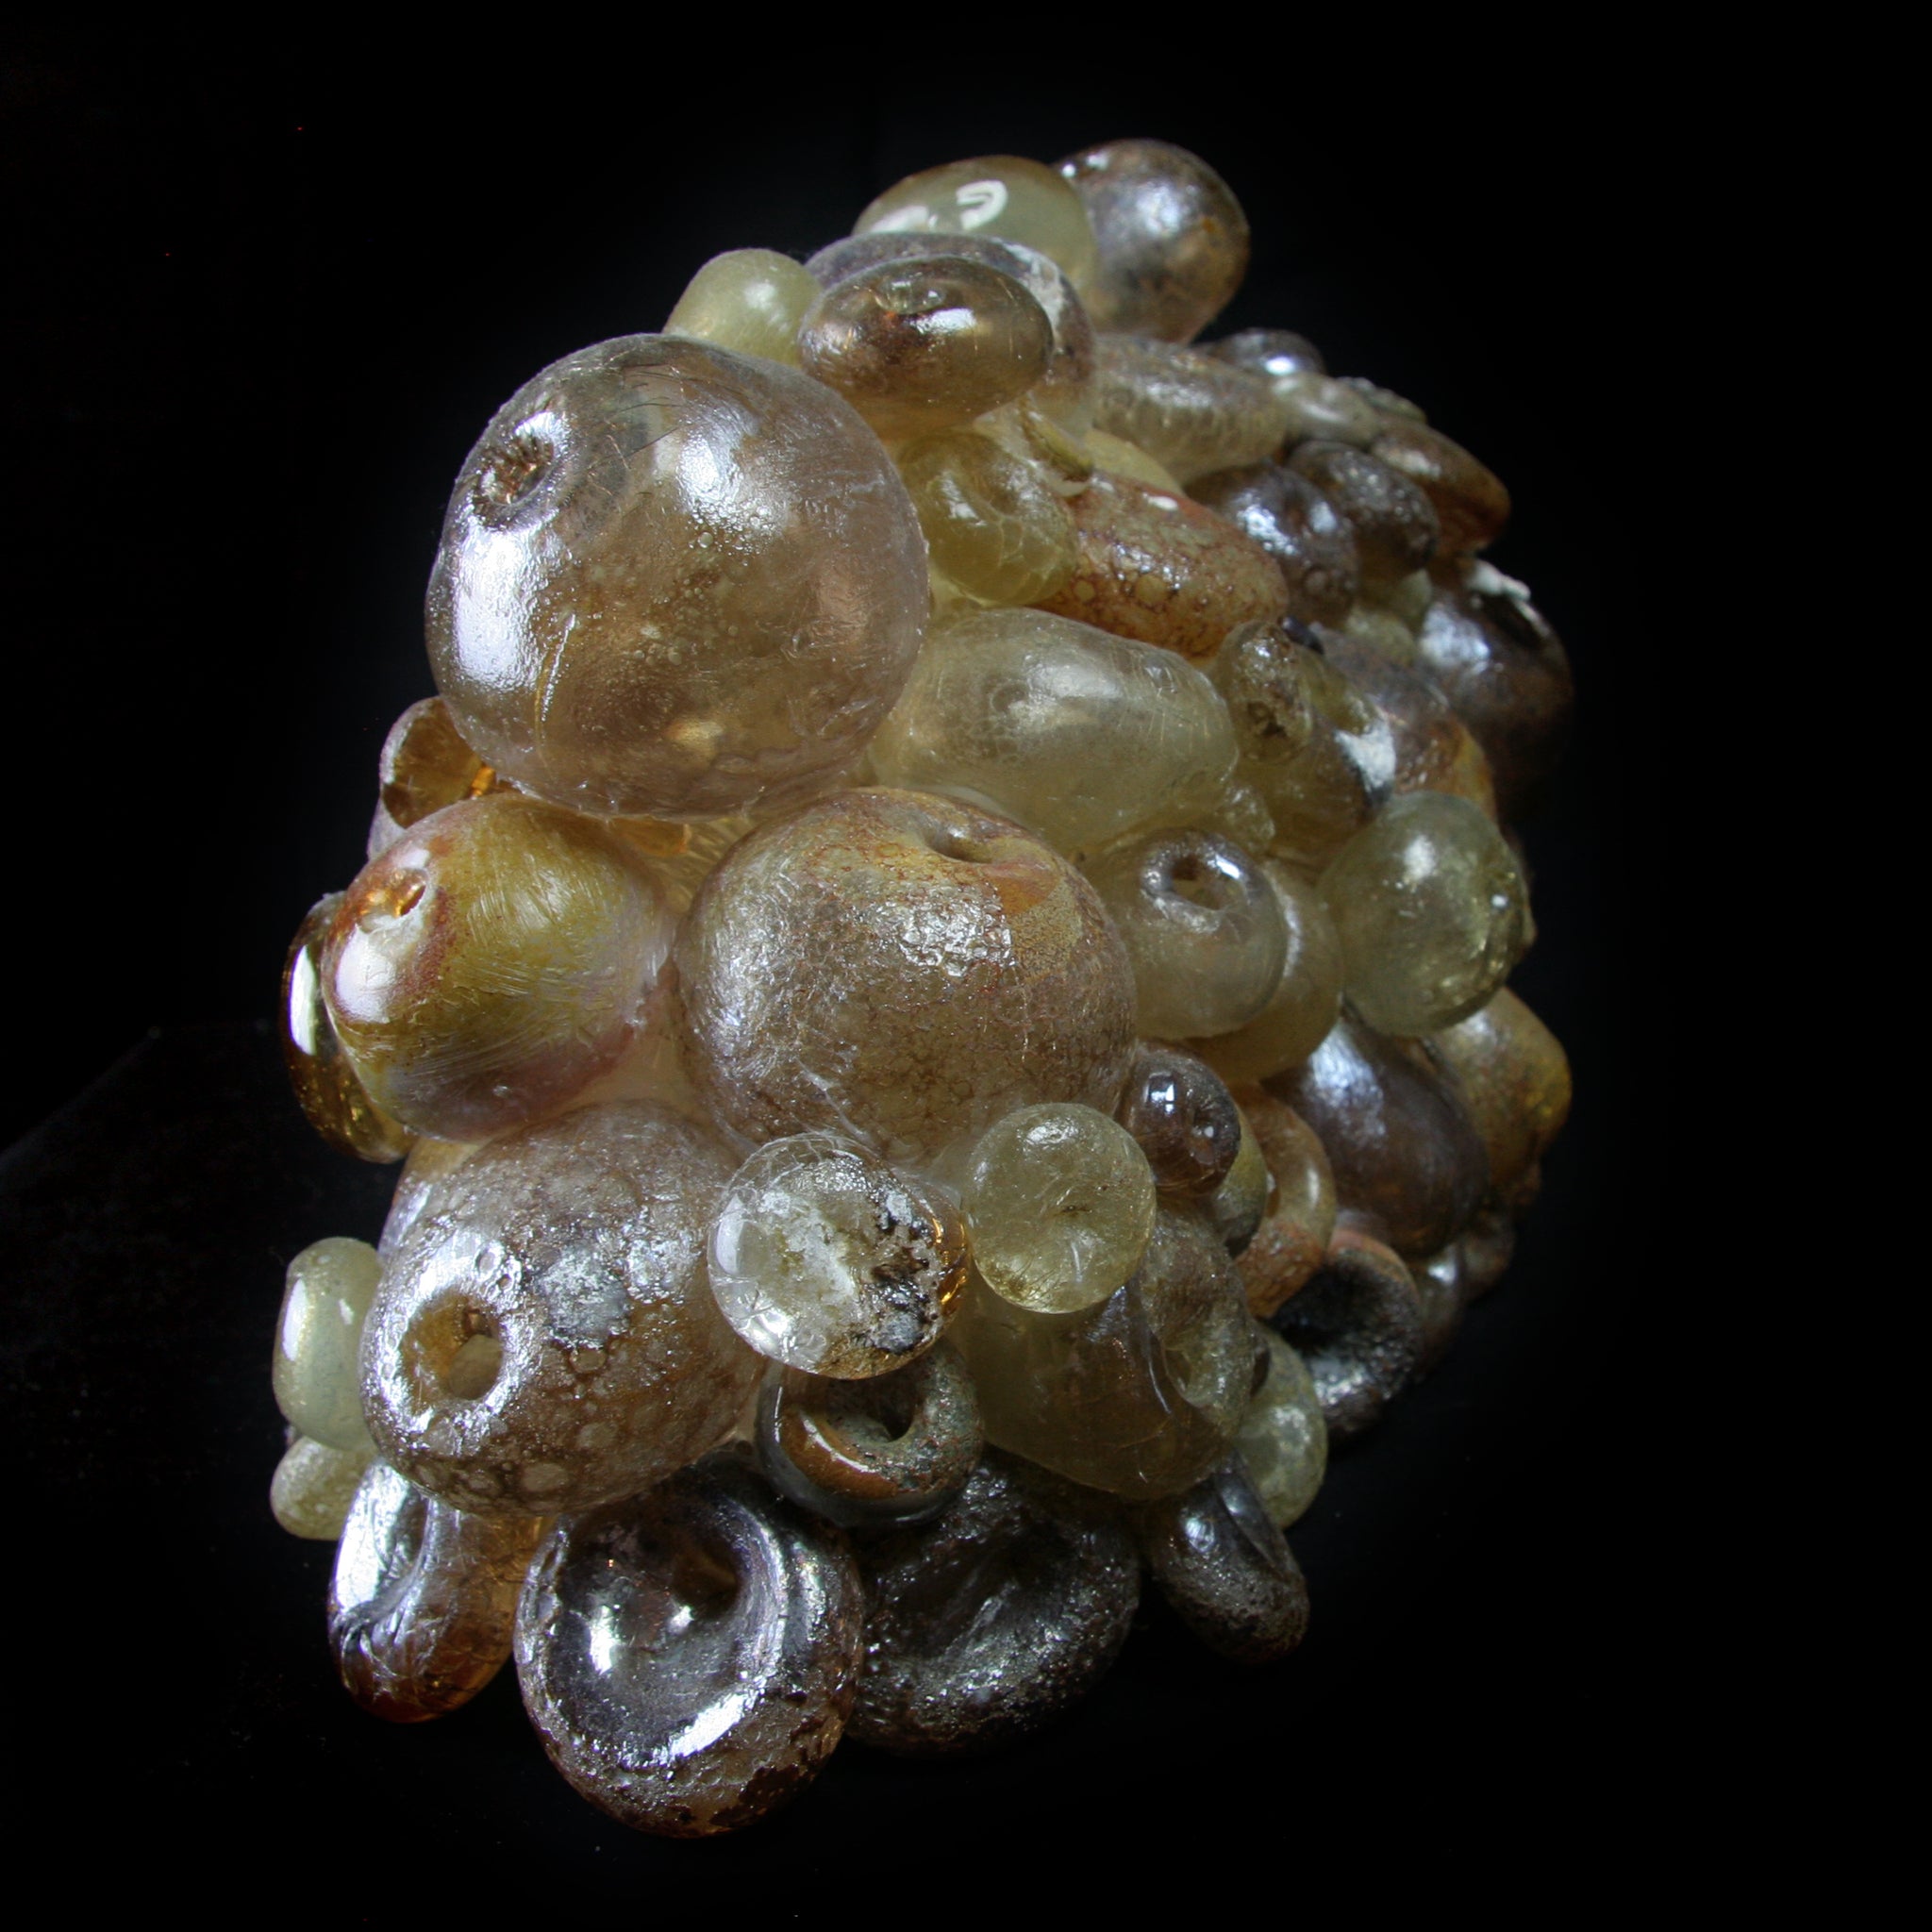 Back side view of Large Brown Barnacle glass sculpture